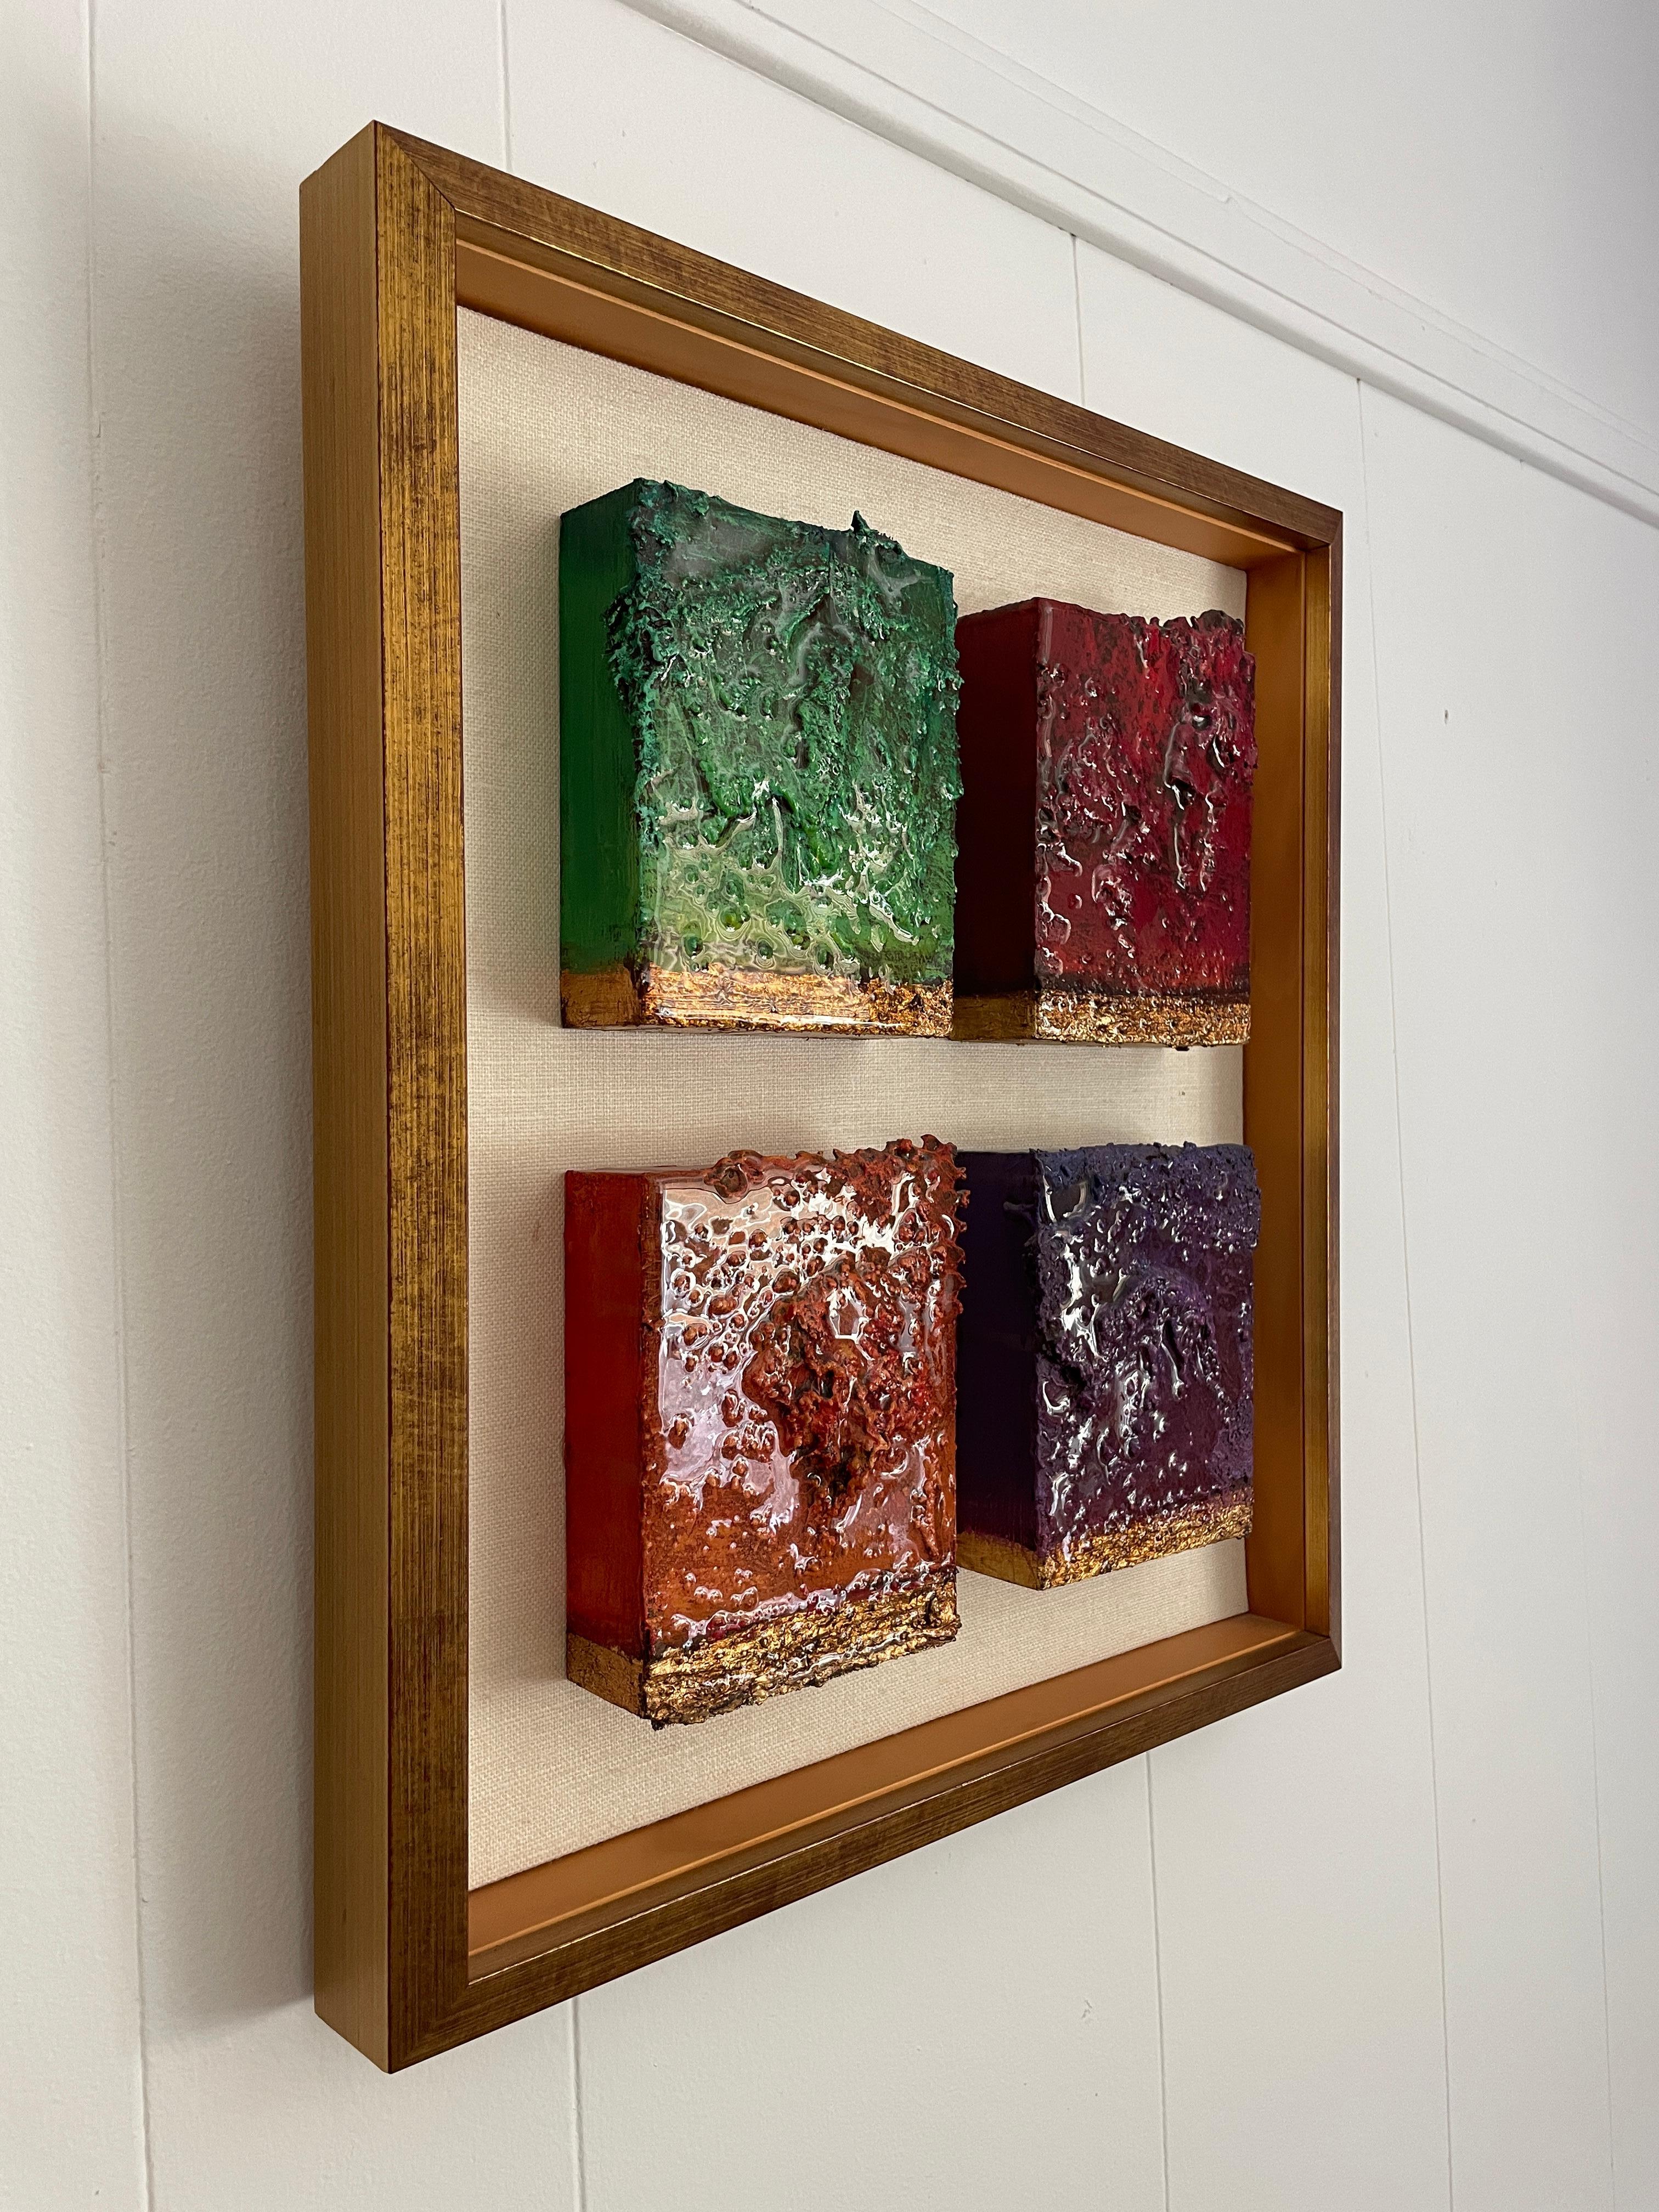 Stunning wall sculpture by Sylvia Moss. It contains four 3D resin-covered cubes in different colors. 

Sylvia (1935-May 9, 2011) was born into an artistic family and began painting and drawing in her teens. She attended many schools and classes: